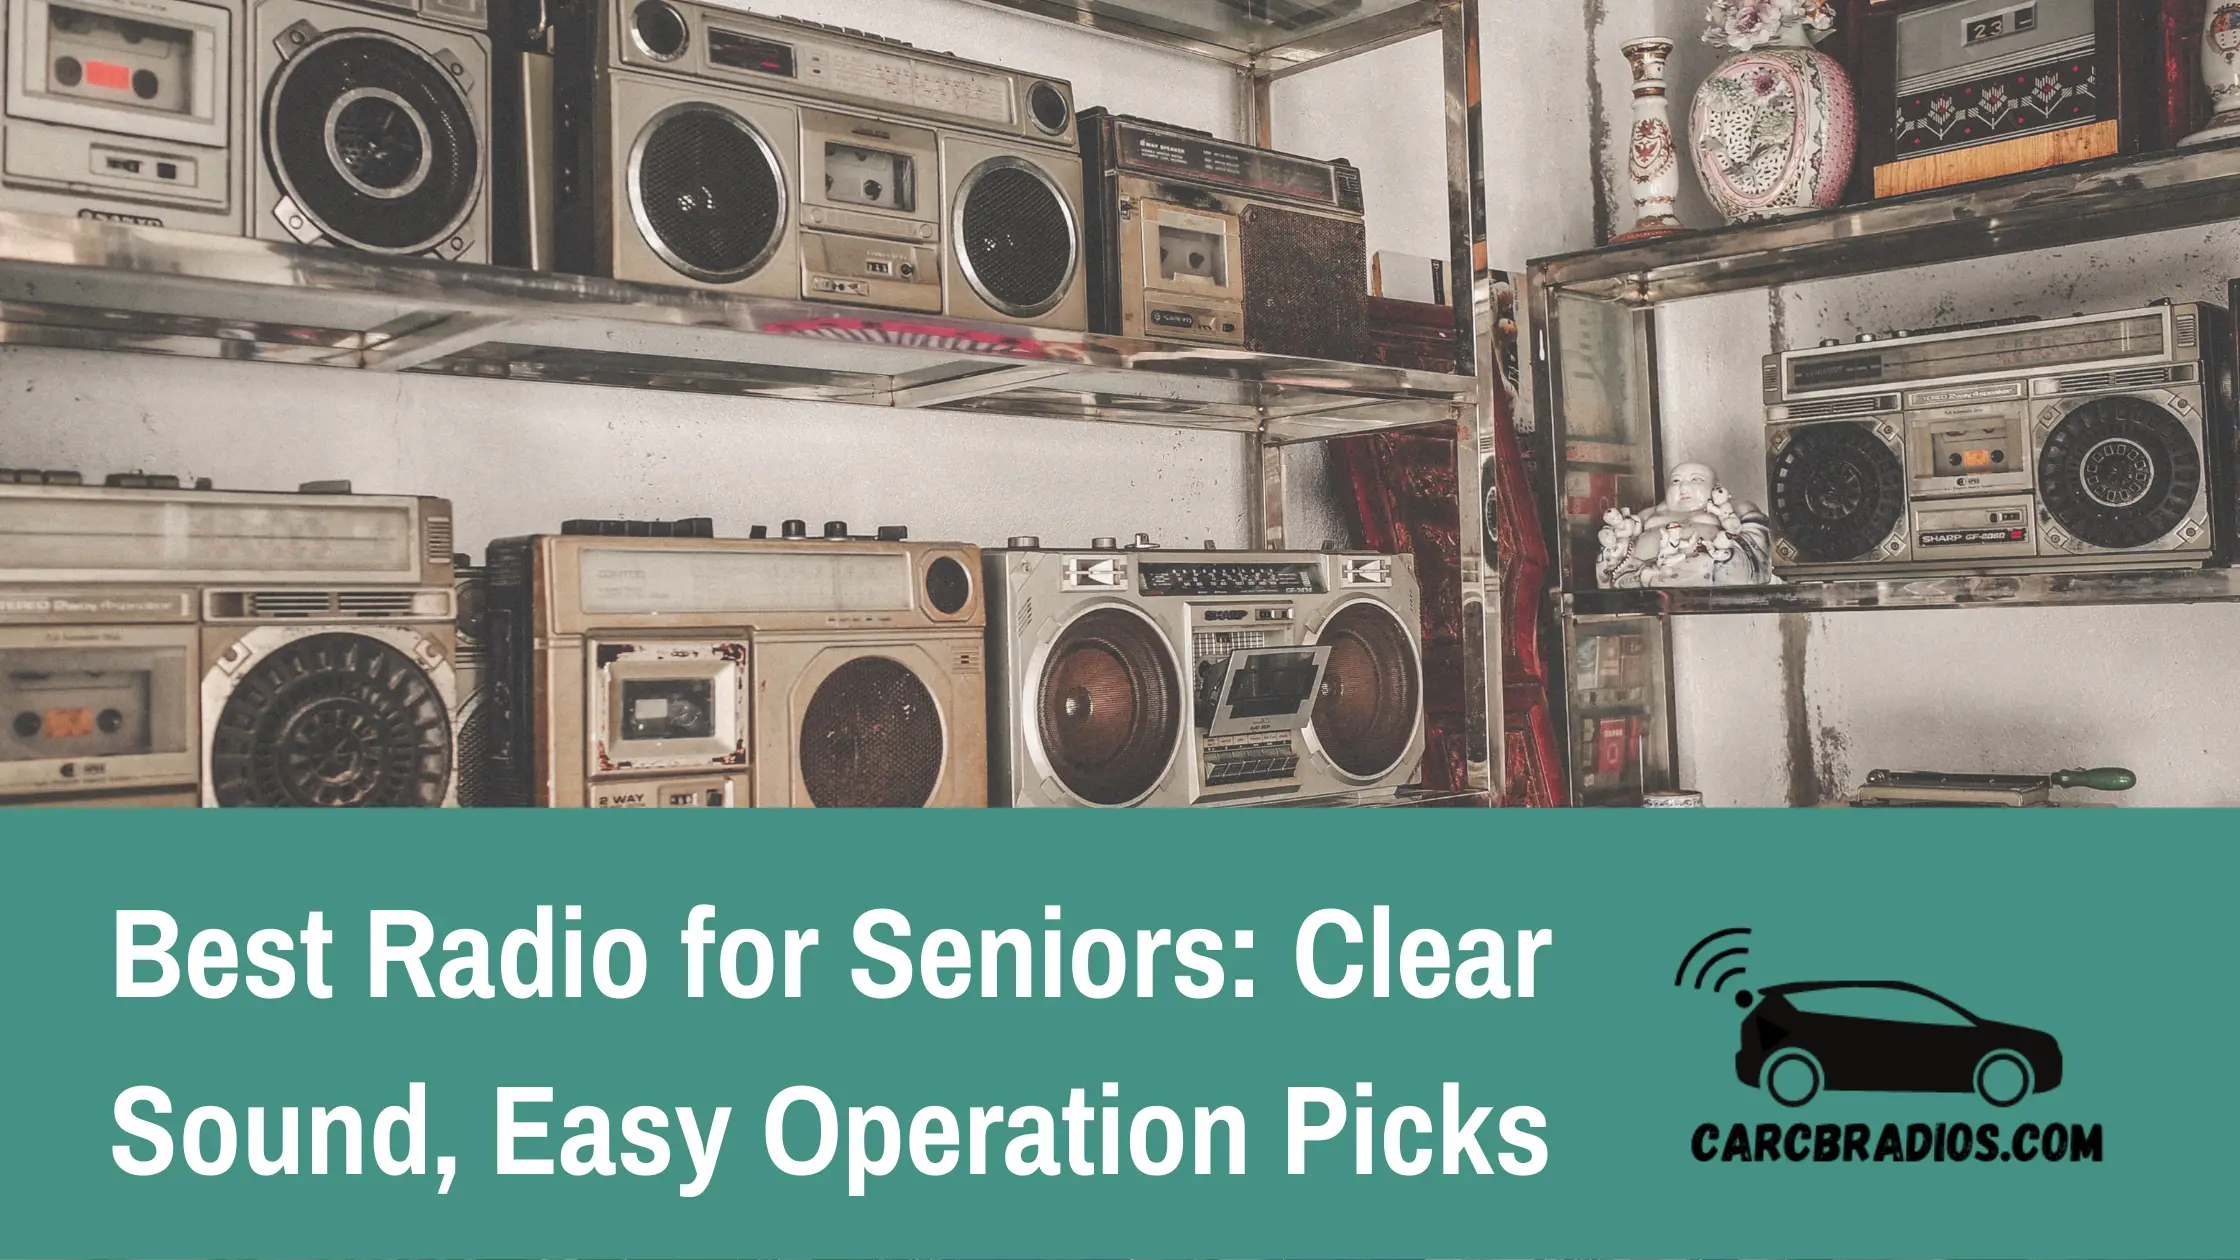 When searching for the best radio for seniors, there are several factors to consider. First, the radio should have large, easy-to-read buttons and a clear display screen. This is especially important for seniors with visual impairments. Additionally, the radio should have simple and straightforward controls, so seniors can easily navigate the device without confusion.